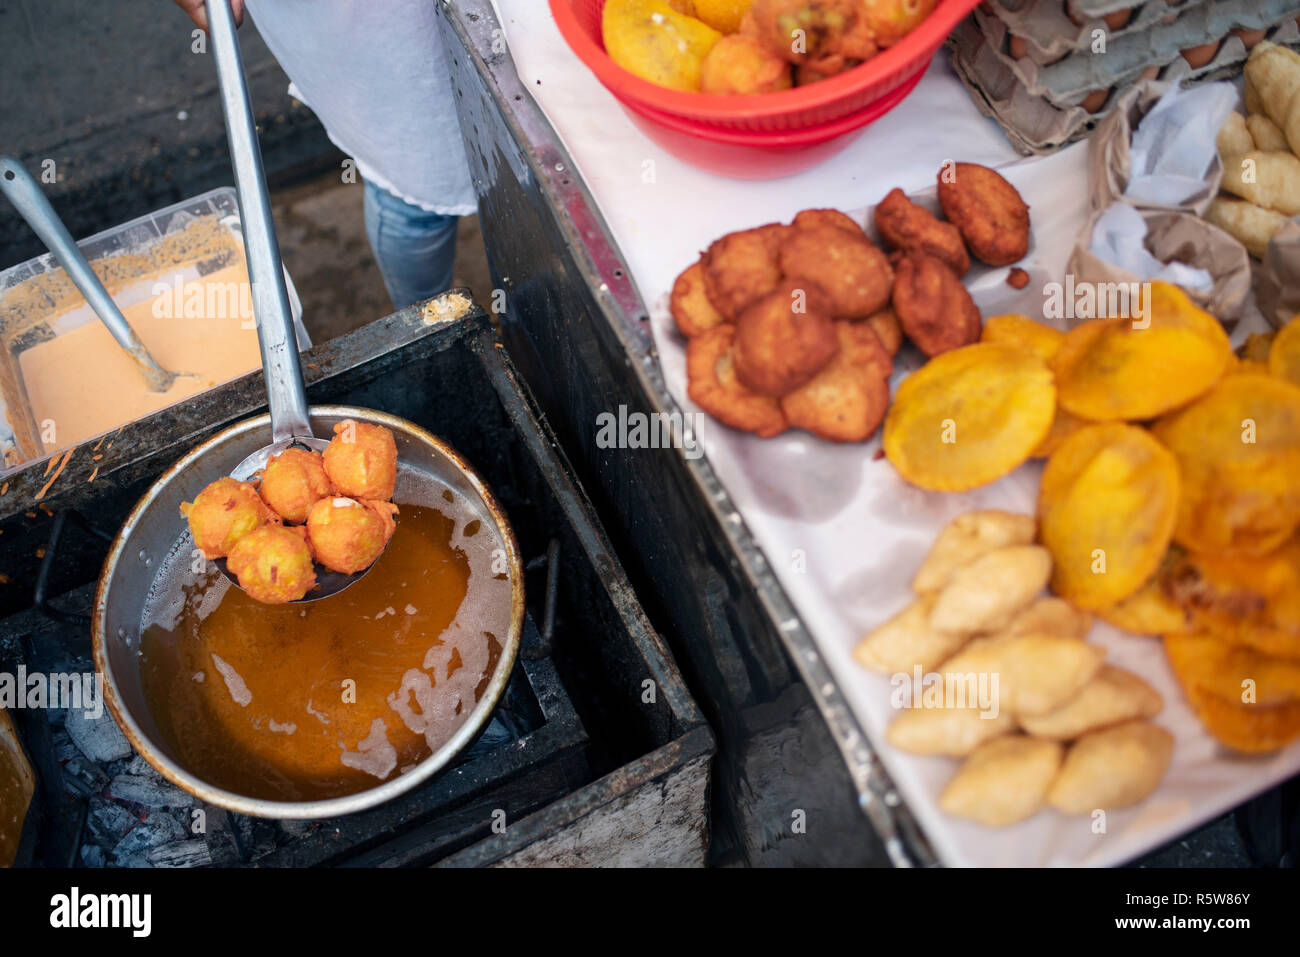 Fried street food in the making. Yuca, potato, patacones with costeño (plantains with soft cheese) and arepa with egg. Cartagena de Indias, Colombia Stock Photo